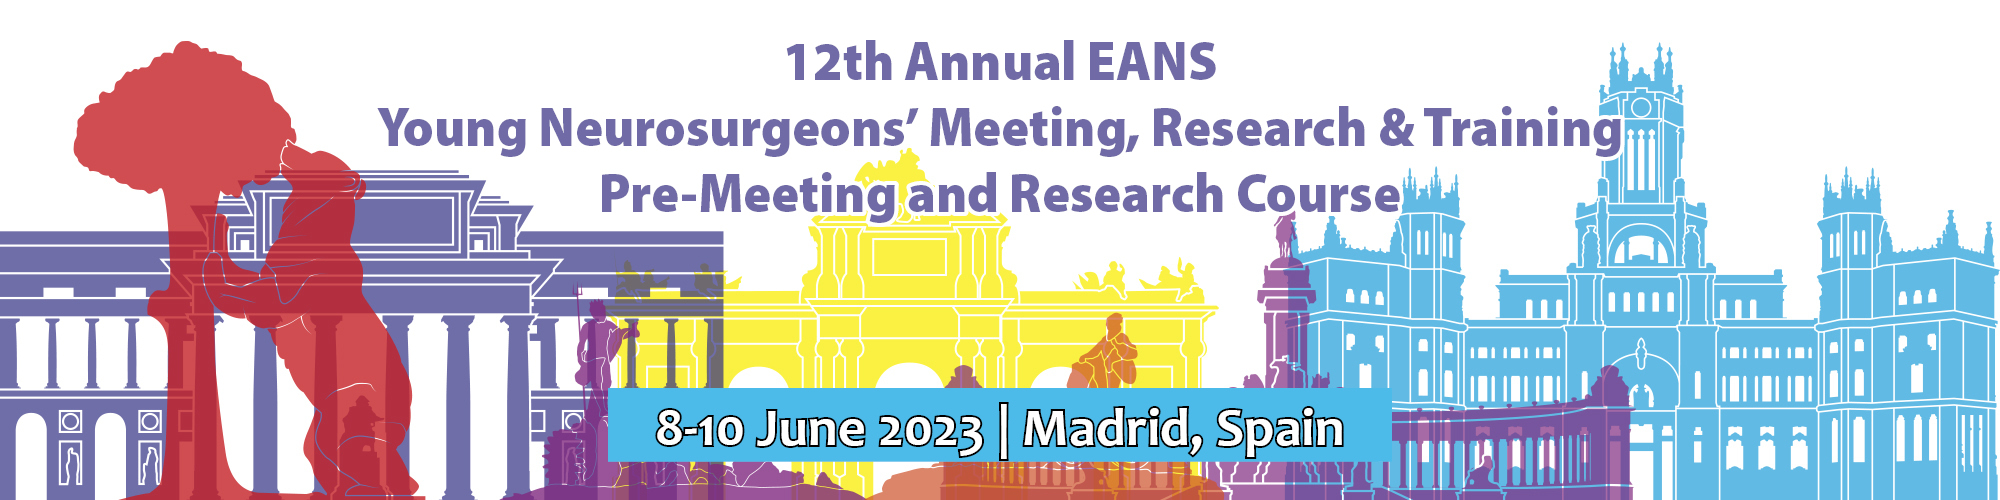 EANS Young Neurosurgeons Meeting and Research Course